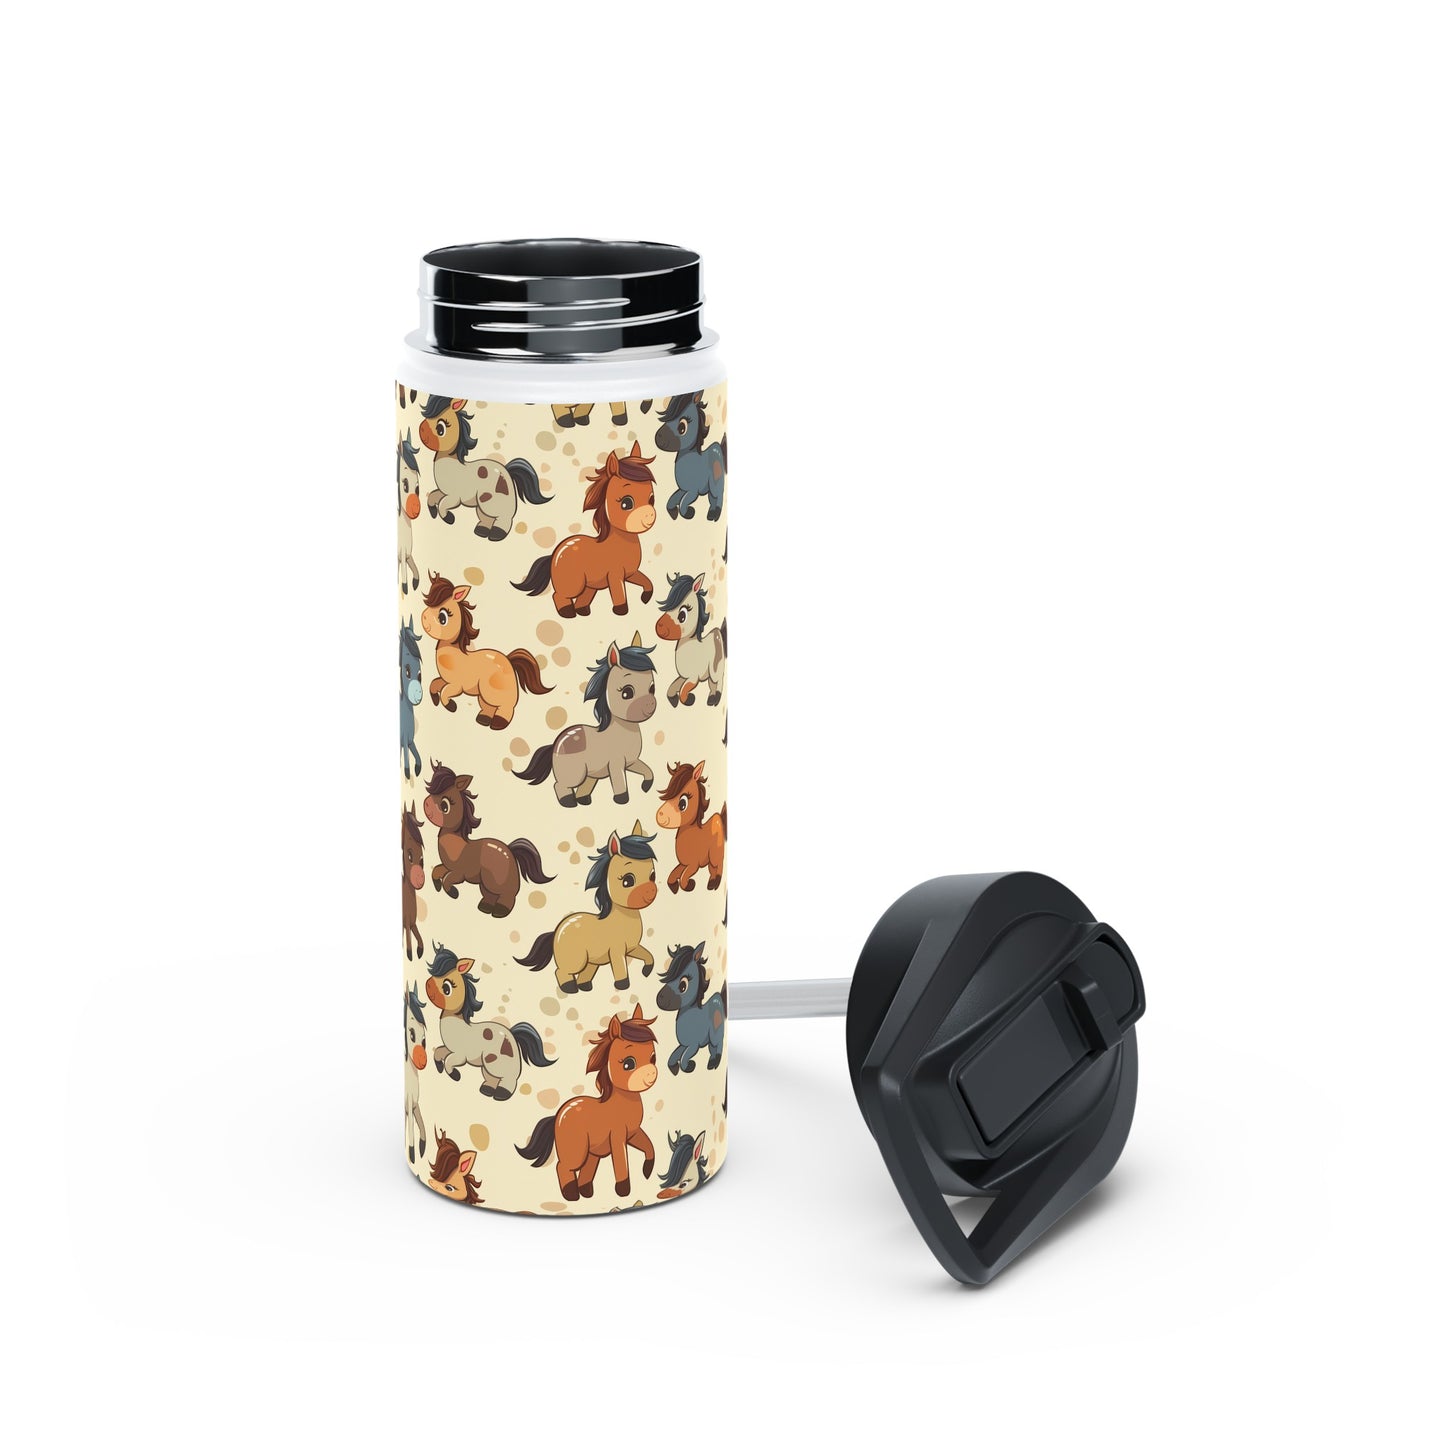 Insulated Water Bottle Thermos, 18oz, Cute Baby Horses - Double Walled Stainless Steel, Keeps Drinks Hot or Cold